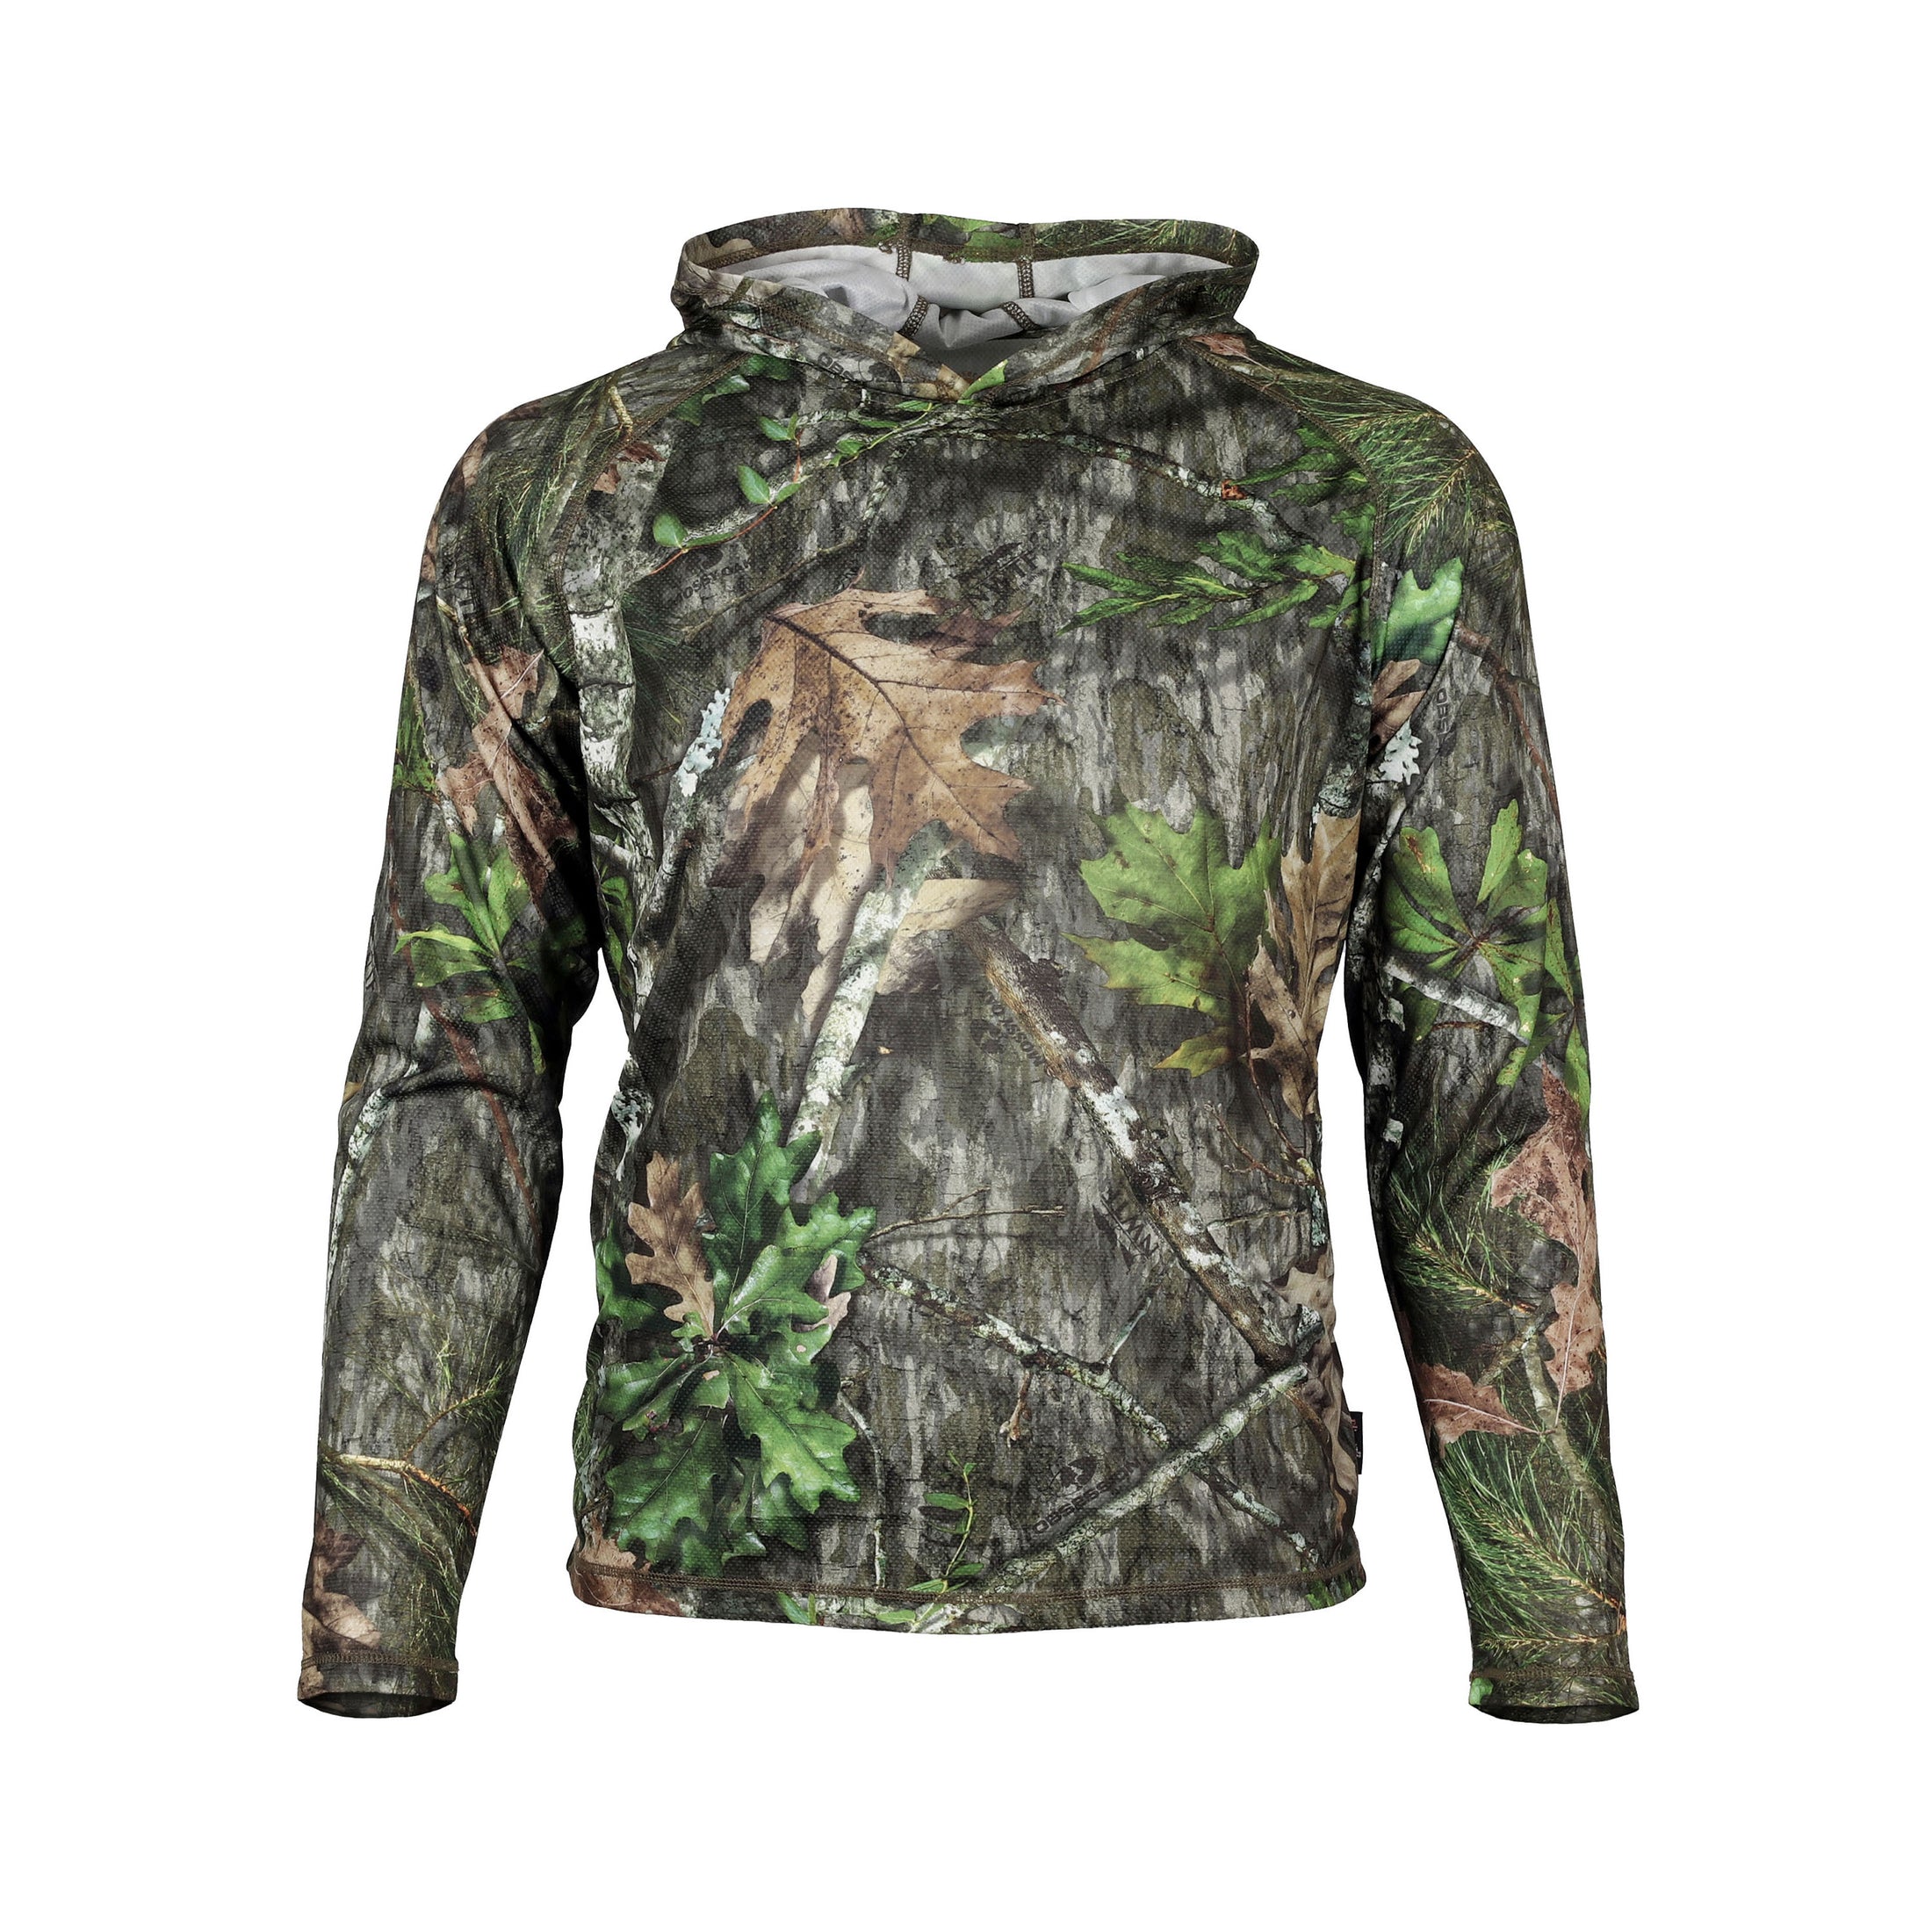 gamehide ElimiTick Lightweight Long Sleeve Hooded Shirt front (mossy oak obsession)